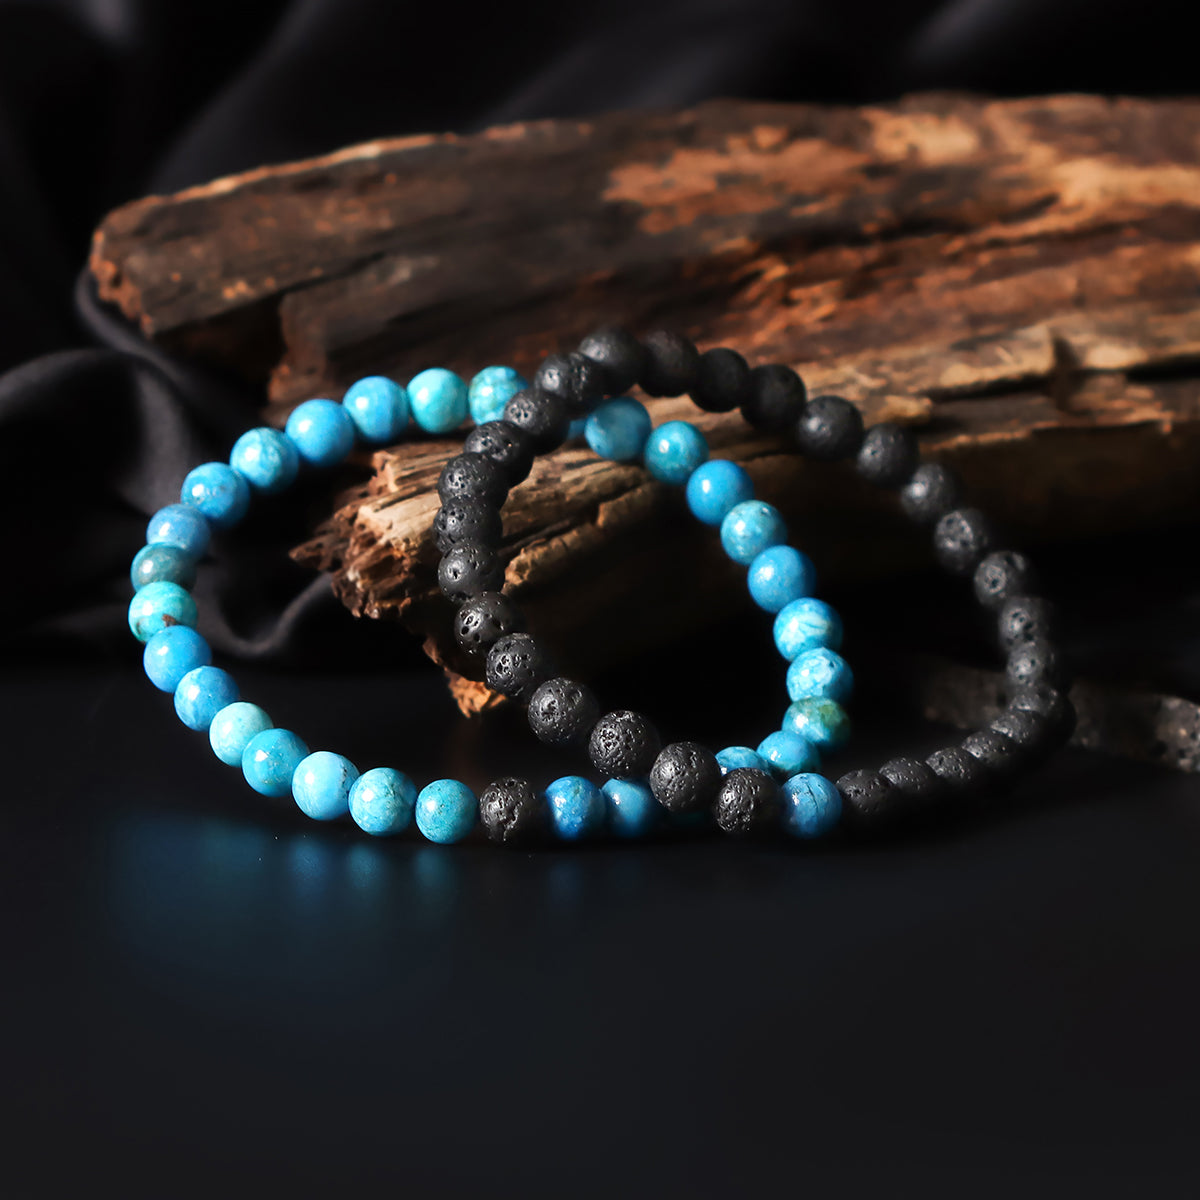 Artistic close-up of the Natural Blue Opaline & Lava Gemstone Bracelet. A captivating shot capturing the tranquil blue hues of Opaline and the raw elegance of lava gemstones, creating a unique and eye-catching composition.